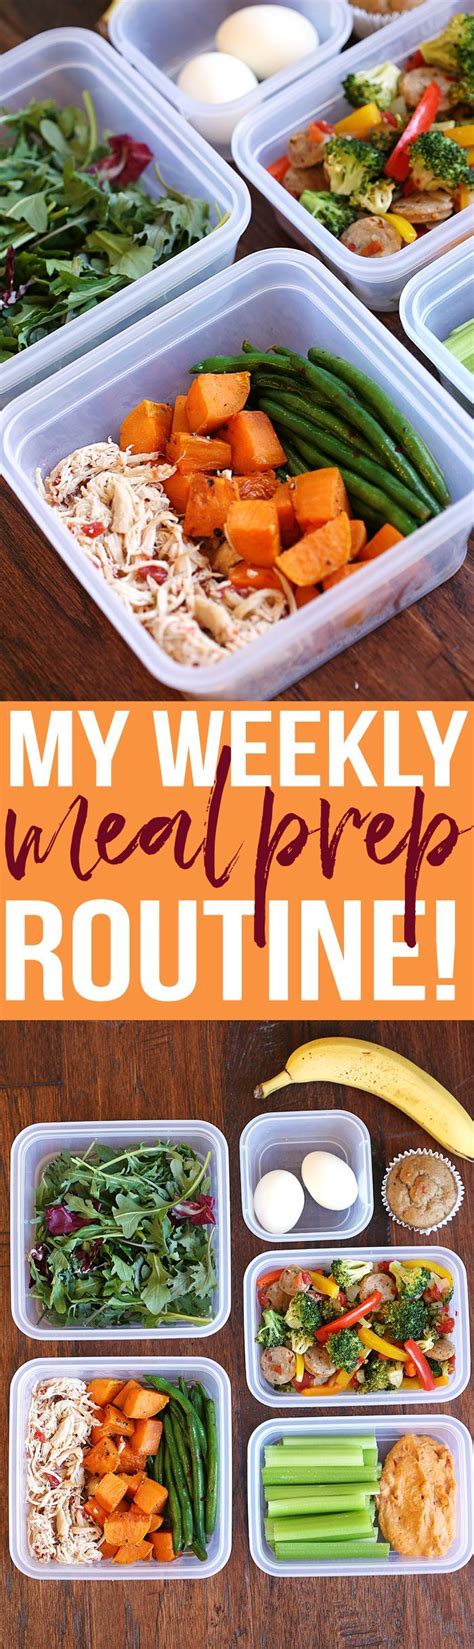 My Favorite Recipes Youll Love My Weekly Meal Prep Routine Complete With All My Favorite Go To